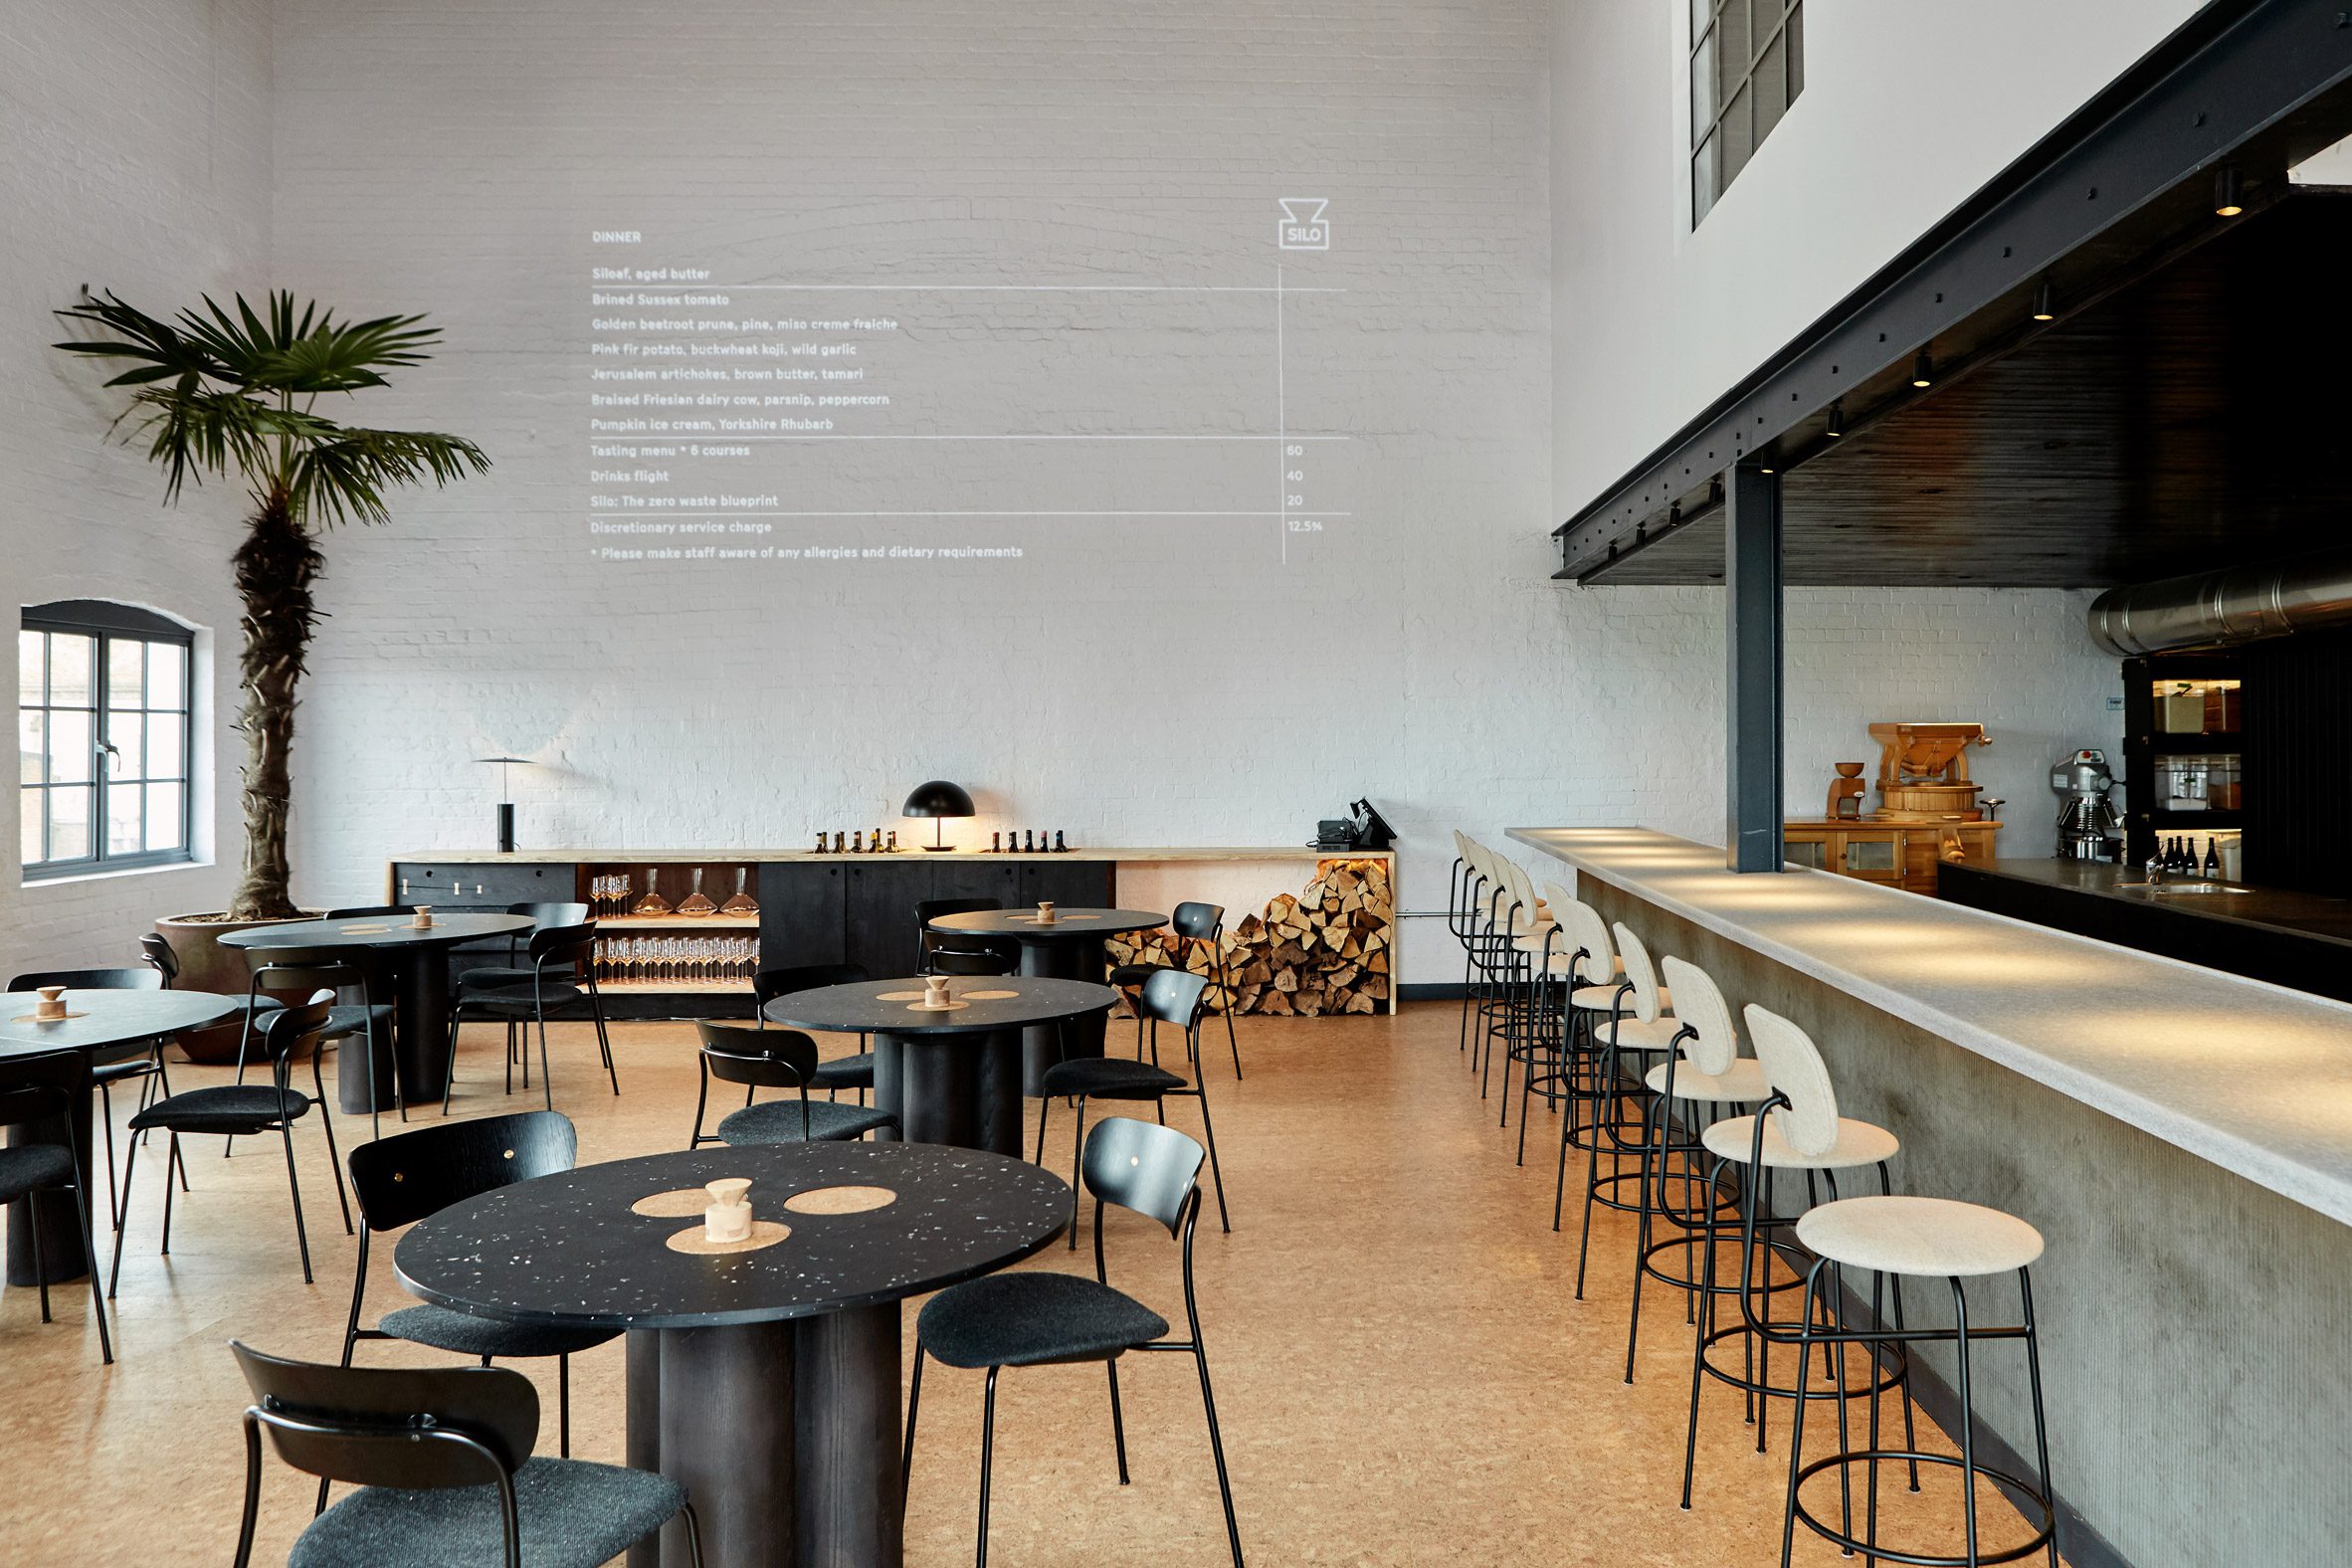 Double-height restaurant interior with menu projected onto the wall